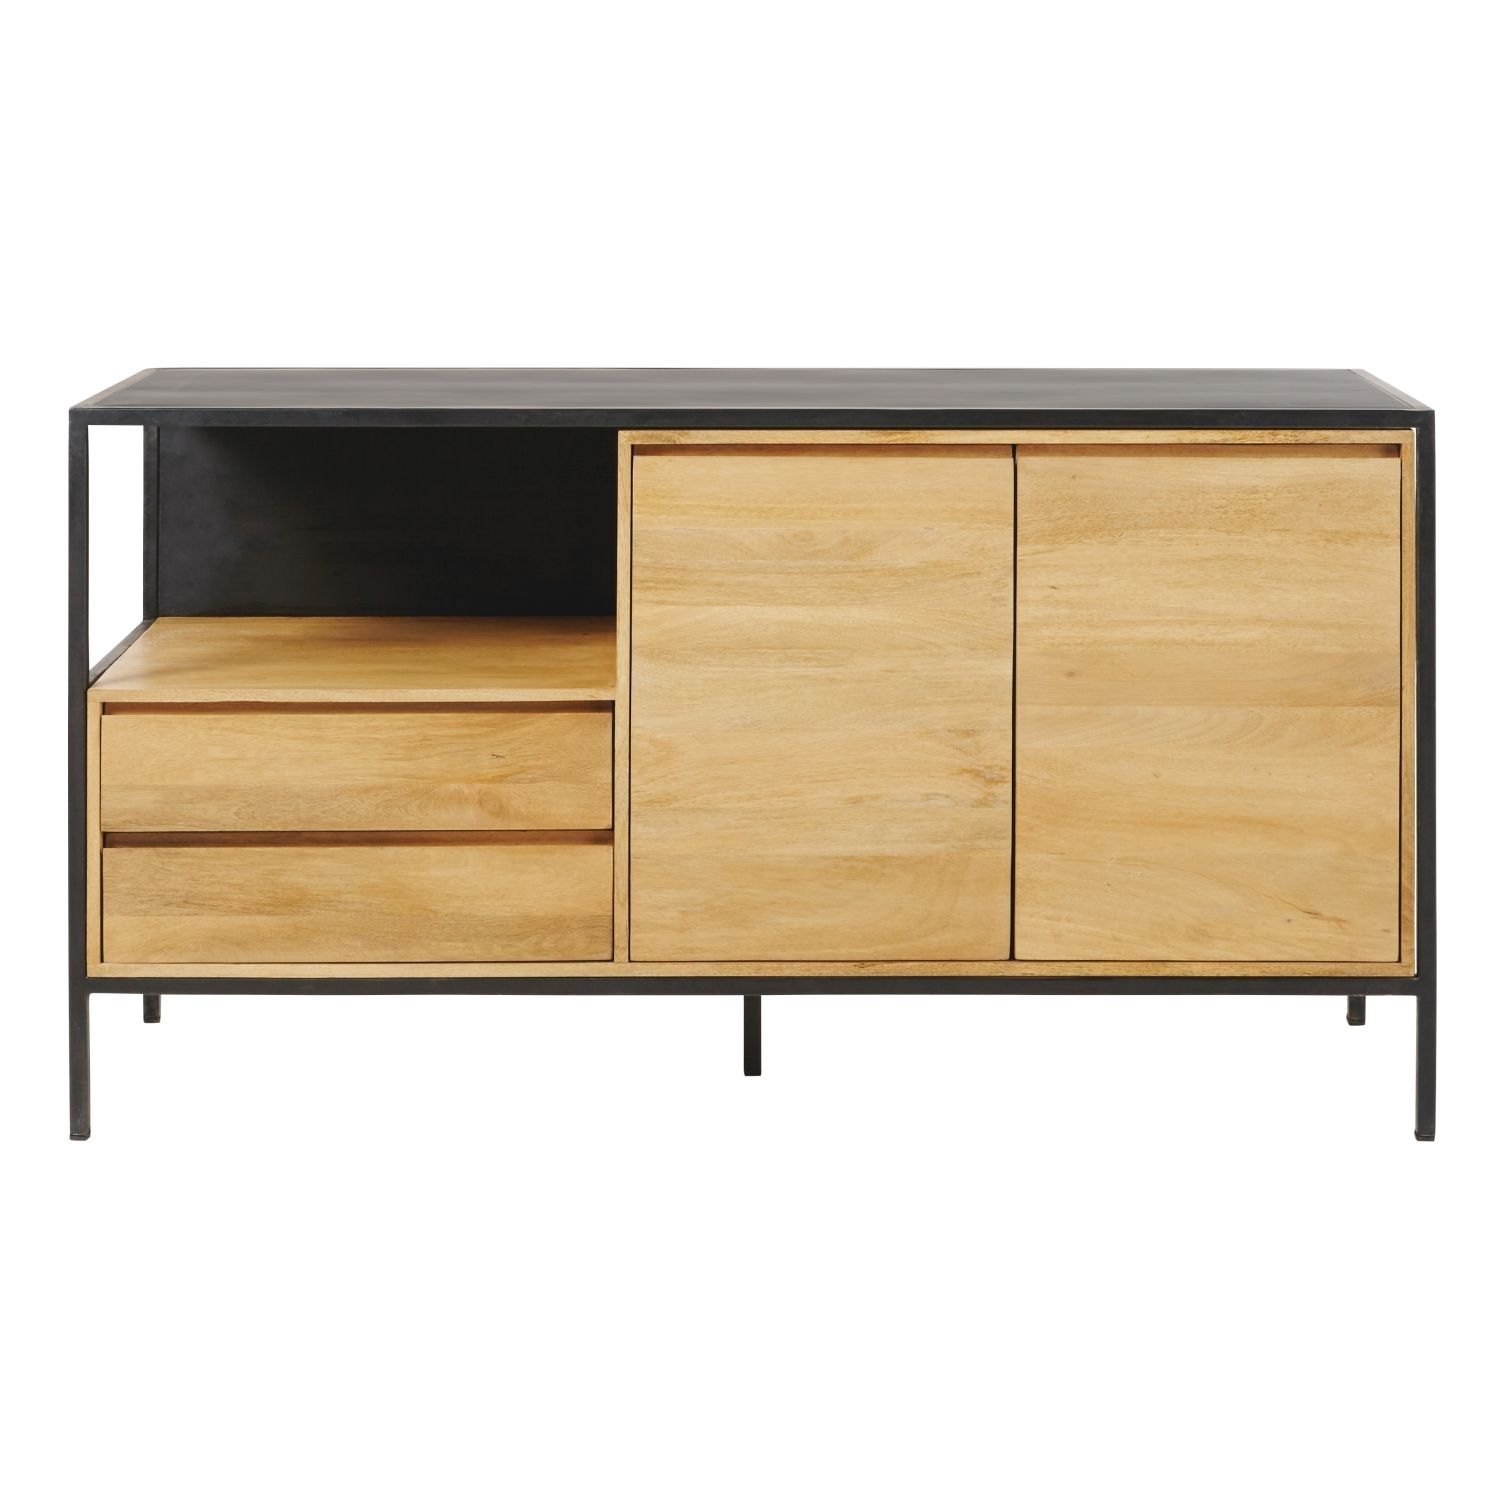 Solid Mango Wood And Black Metal 2 Door 2 Drawer Sideboard | Maisons With Current Mango Wood 2 Door/2 Drawer Sideboards (Photo 5 of 20)